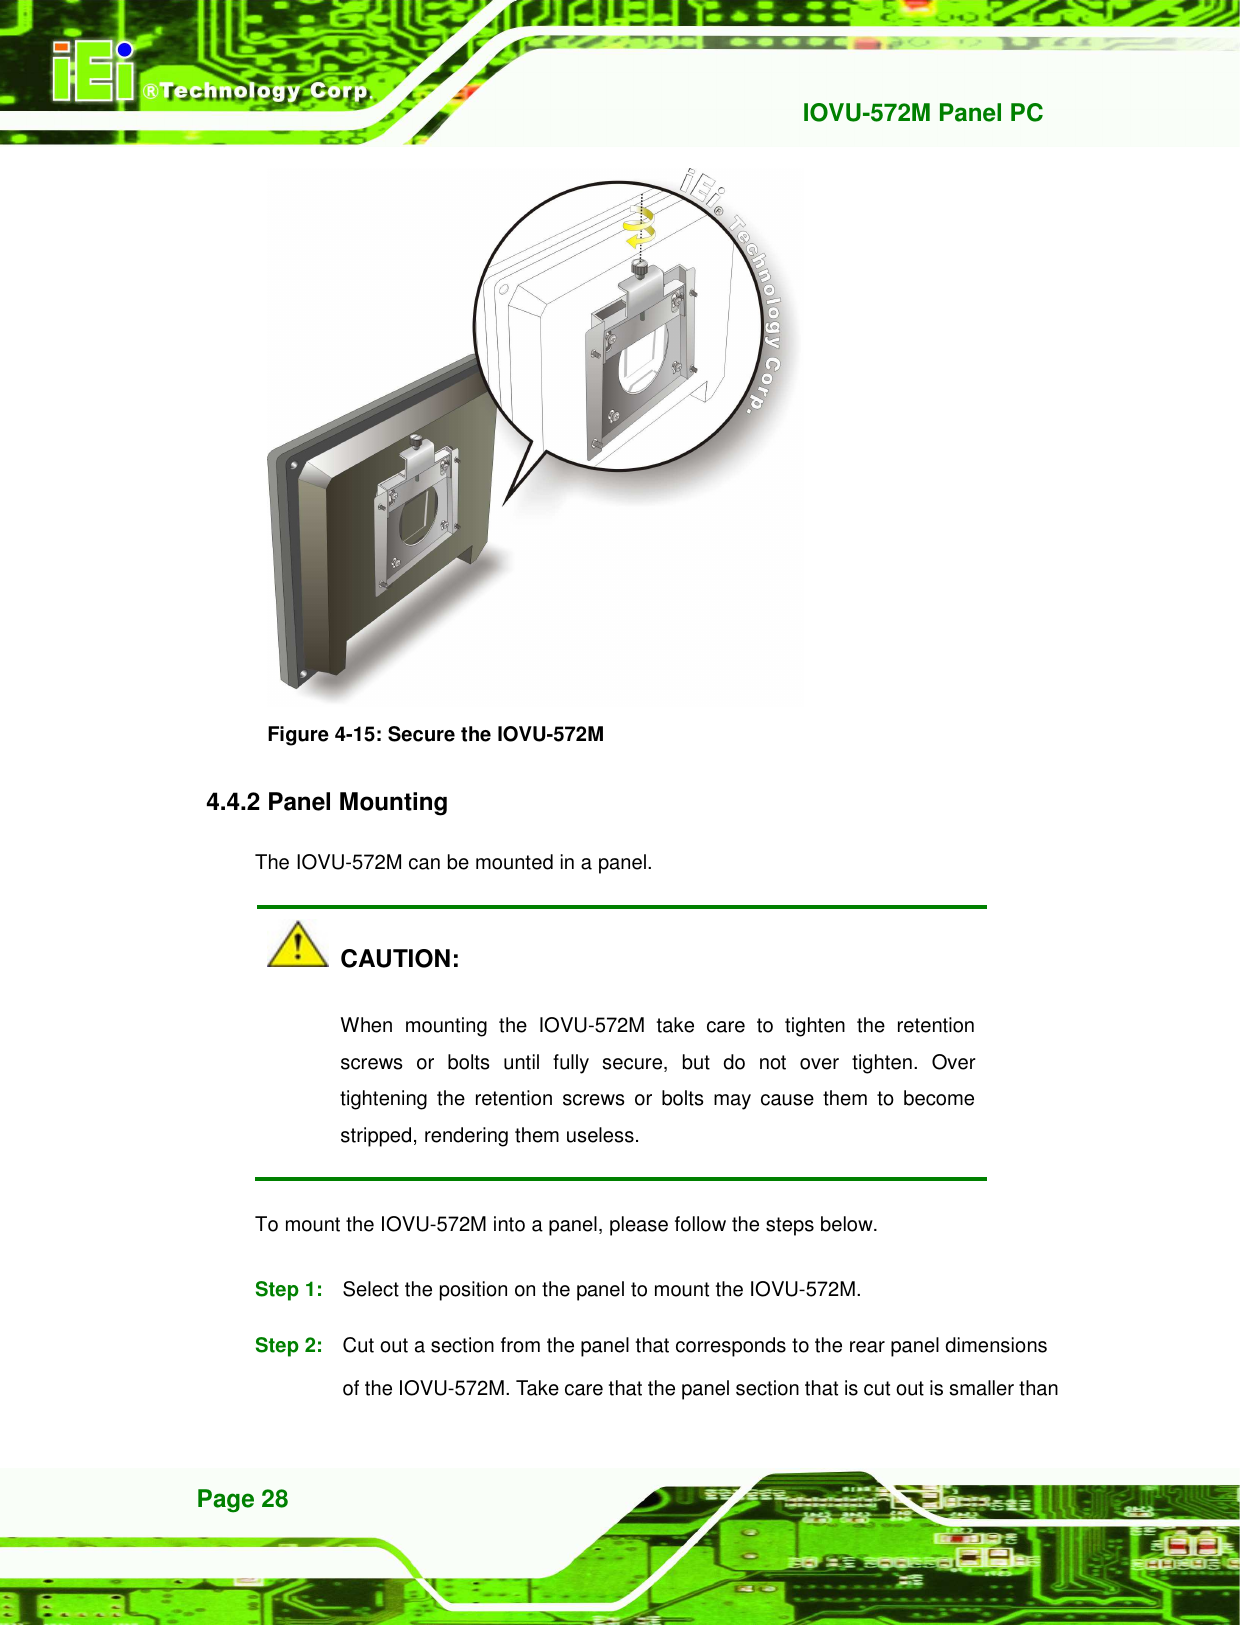   IOVU-572M Panel PC Page 28  Figure 4-15: Secure the IOVU-572M 4.4.2 Panel Mounting The IOVU-572M can be mounted in a panel.     CAUTION: When  mounting  the  IOVU-572M  take  care  to  tighten  the  retention screws  or  bolts  until  fully  secure,  but  do  not  over  tighten.  Over tightening  the  retention  screws  or  bolts  may  cause  them  to  become stripped, rendering them useless. To mount the IOVU-572M into a panel, please follow the steps below. Step 1:  Select the position on the panel to mount the IOVU-572M. Step 2:  Cut out a section from the panel that corresponds to the rear panel dimensions of the IOVU-572M. Take care that the panel section that is cut out is smaller than 